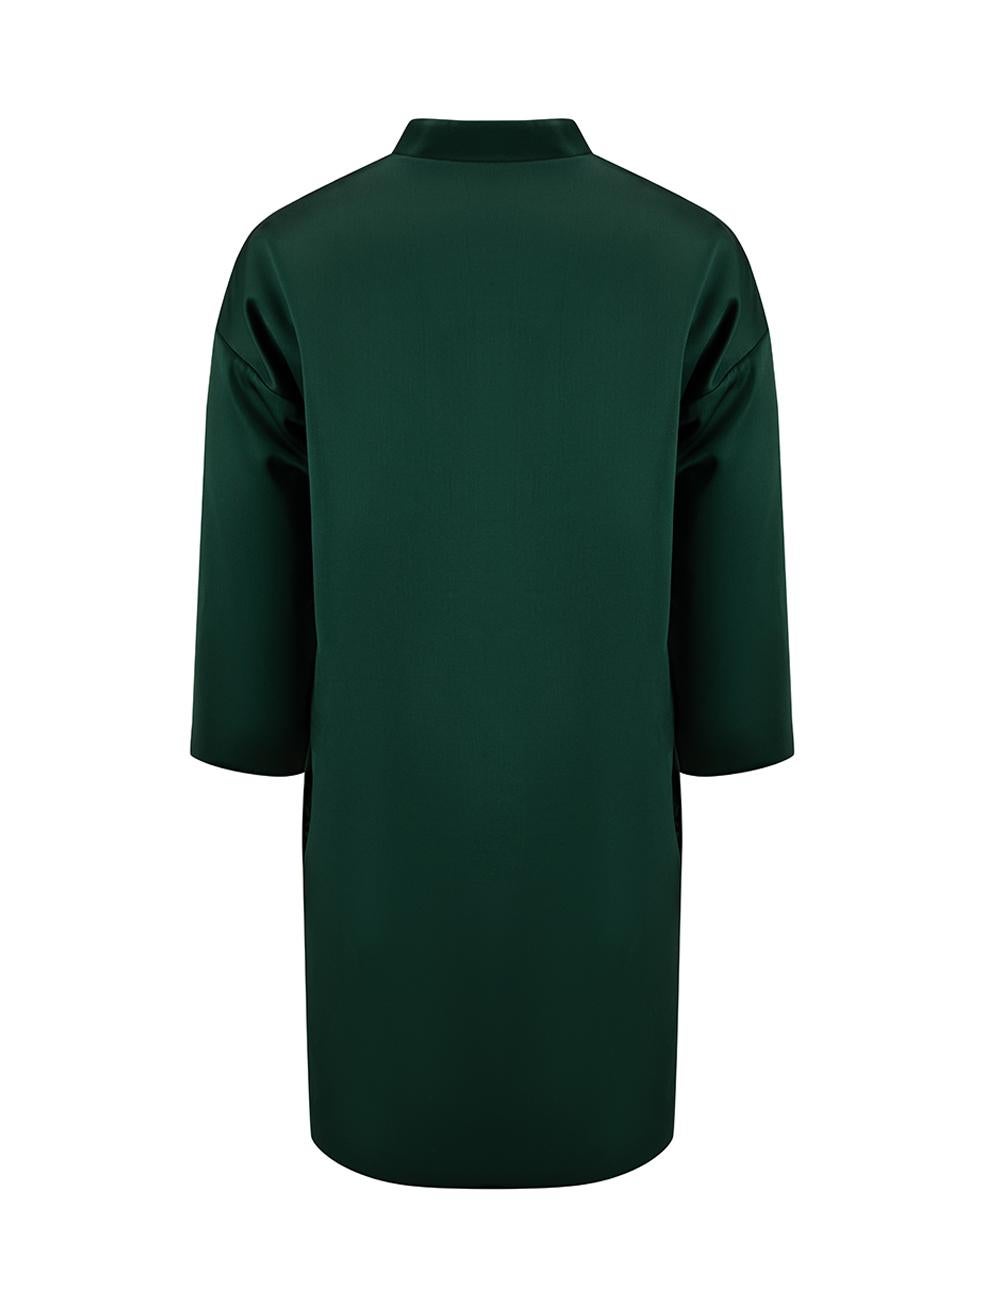 Green Satin V-Neck Mini Dress Size M In Good Condition For Sale In London, GB